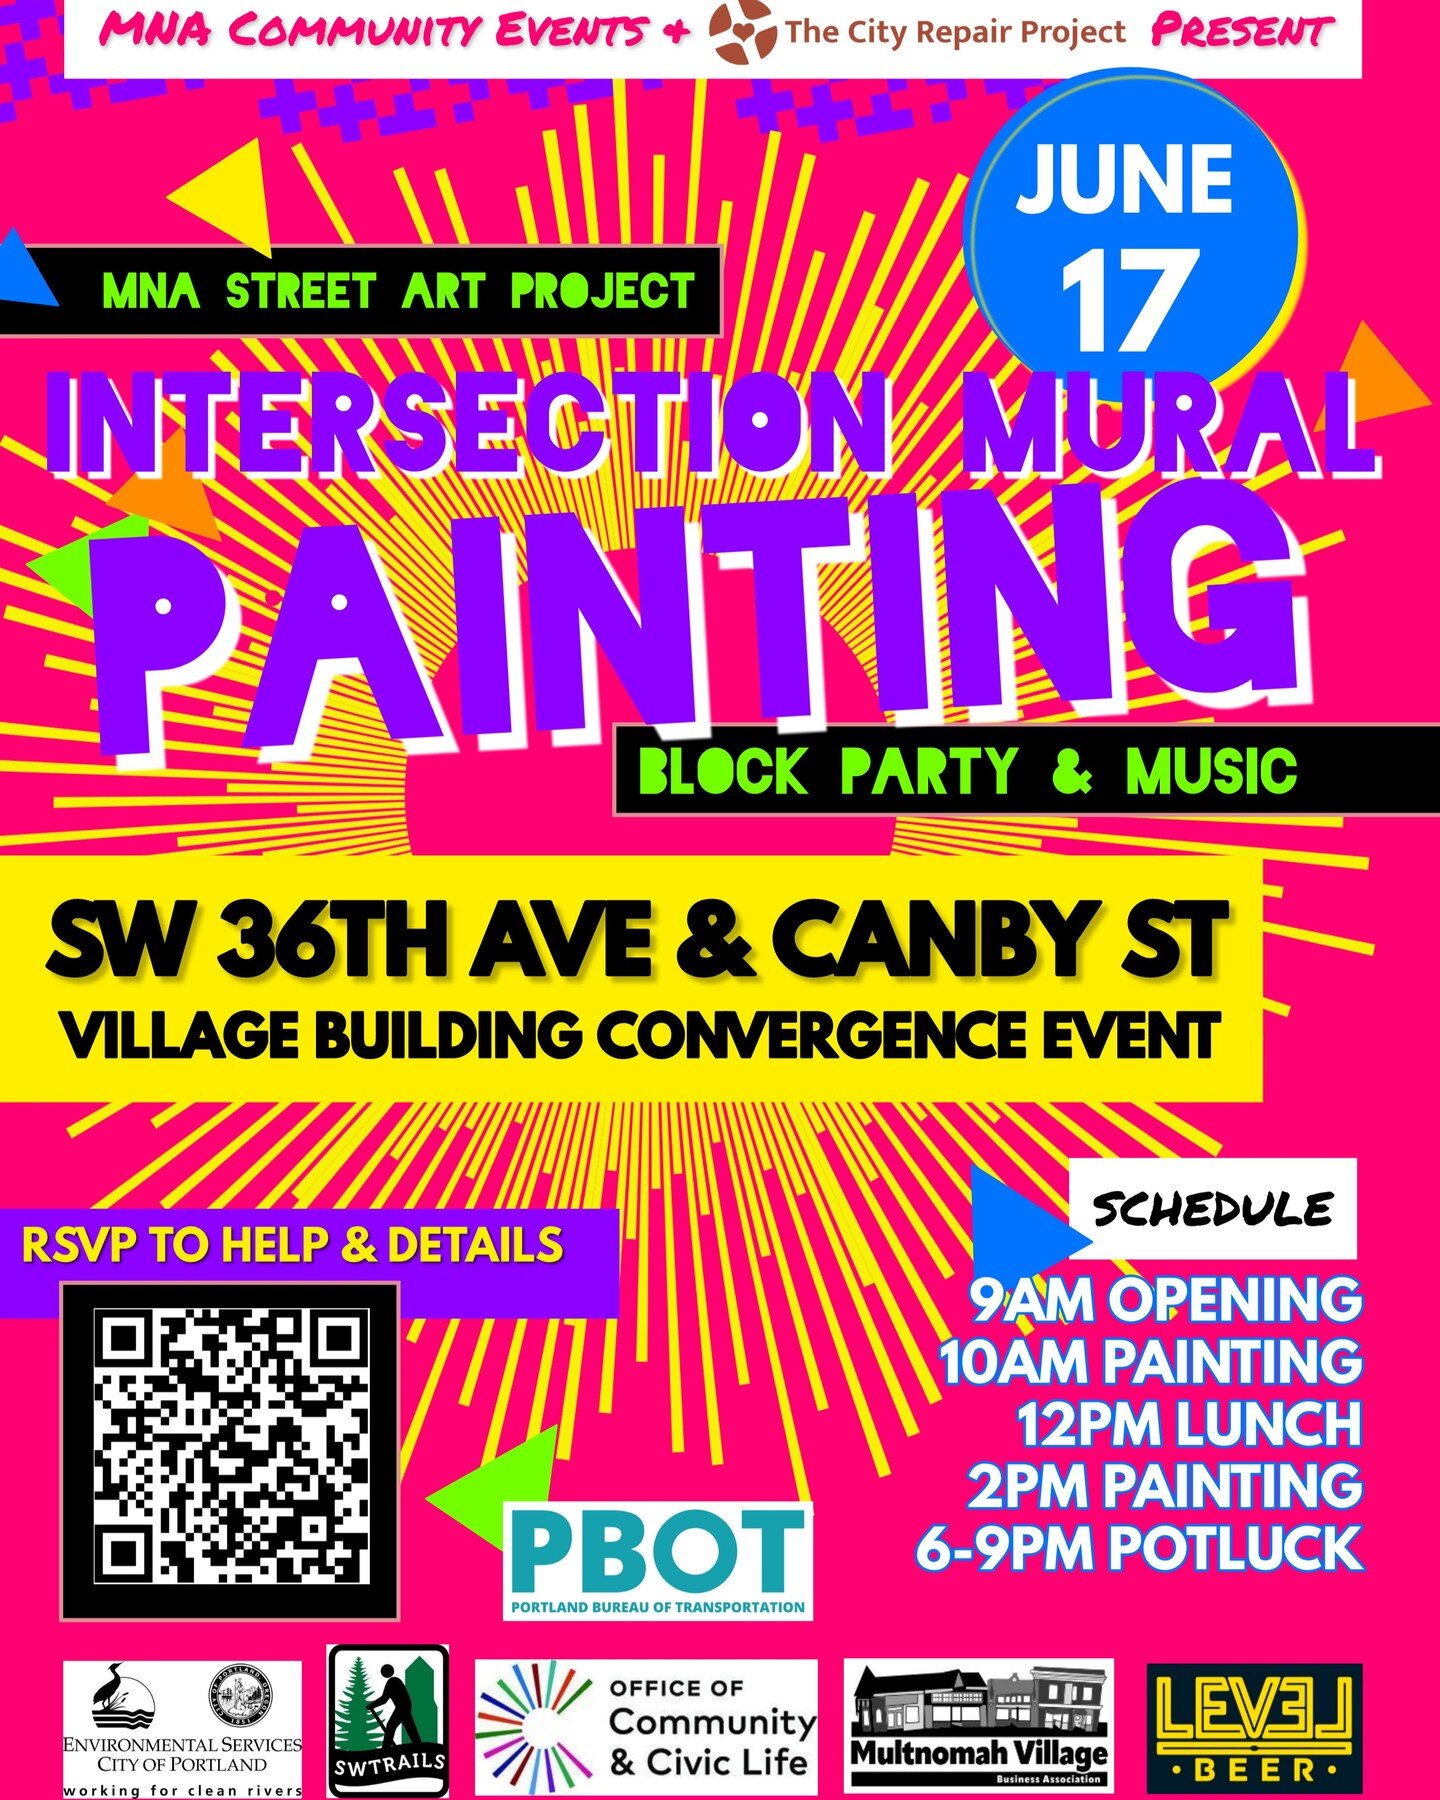 Join us for the closing day of the City Repair Village Building Convergence (VBC) for an all ages community building event in which professional mural artist Amaranta Colindres will guide volunteers in painting a mural on the surface of the pavement 